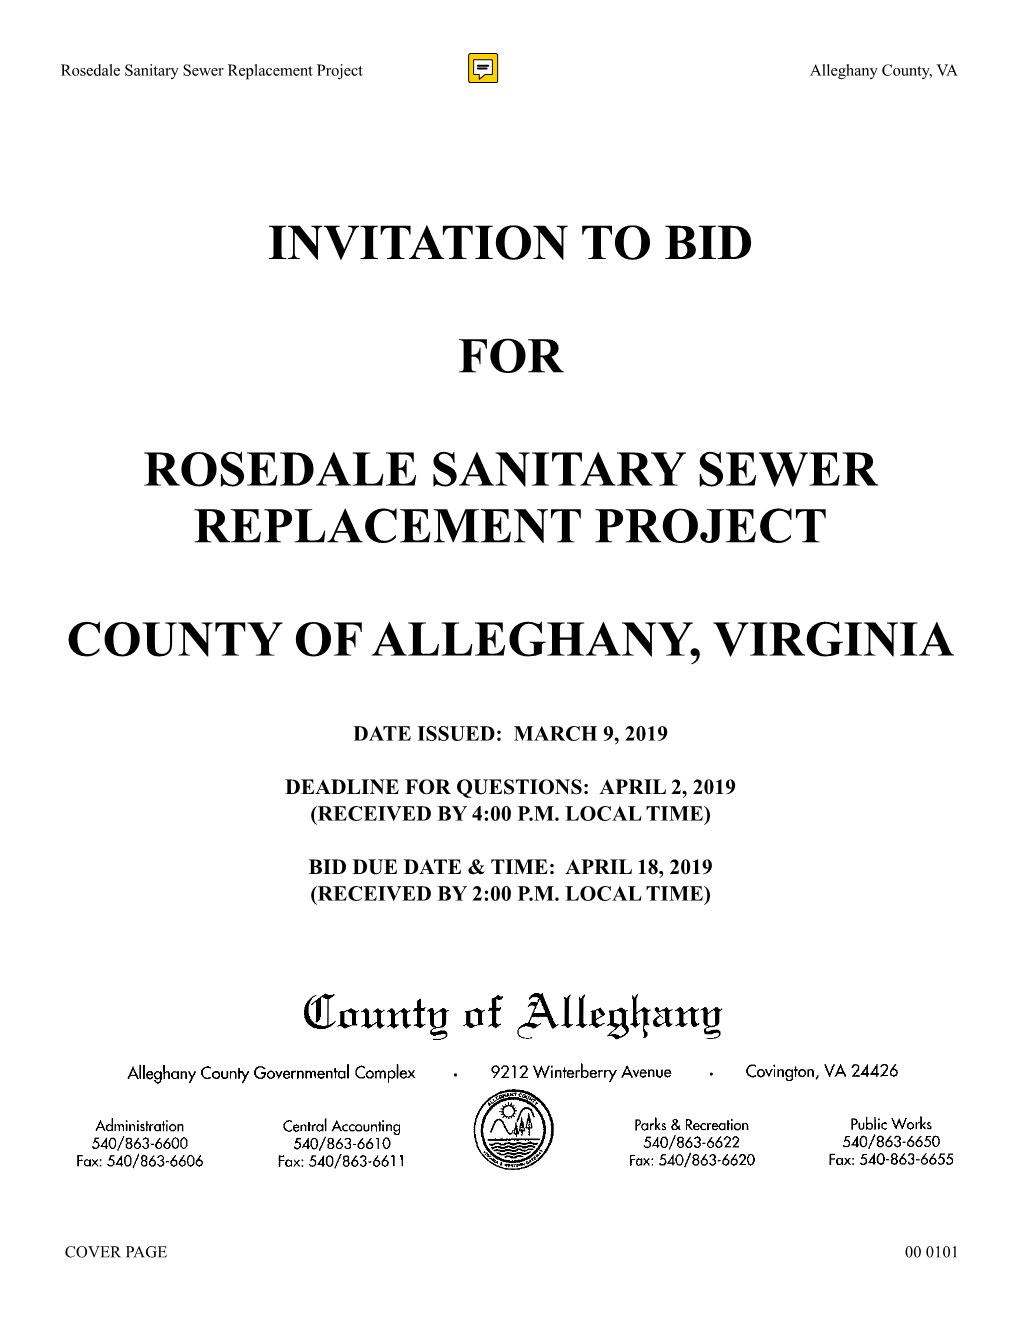 Invitation to Bid for Rosedale Sanitary Sewer